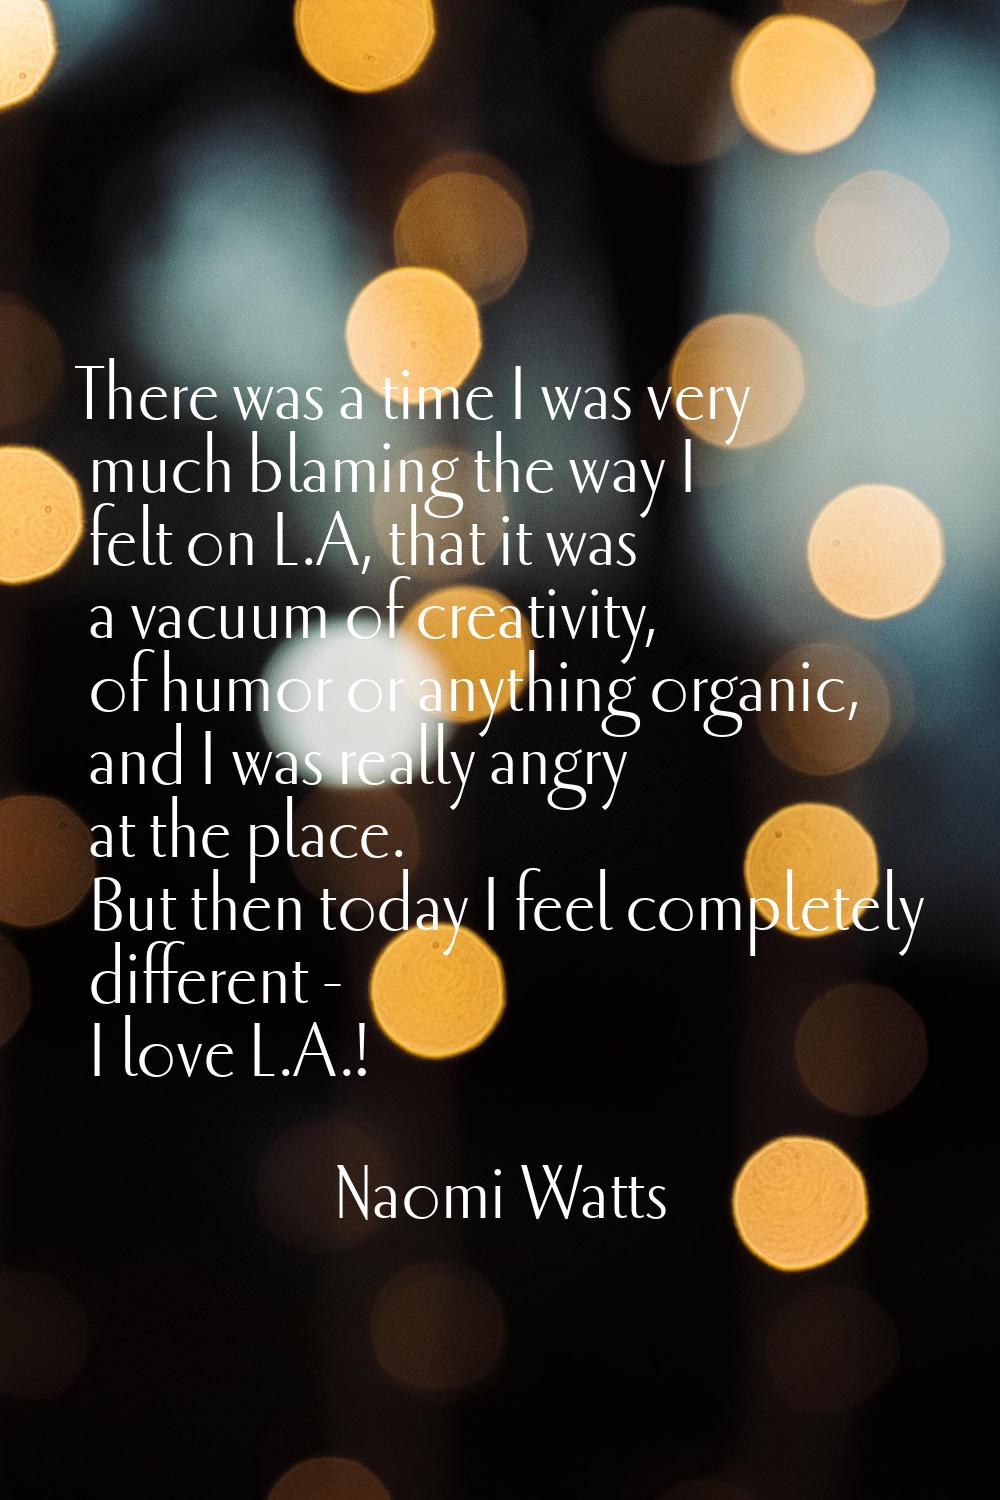 There was a time I was very much blaming the way I felt on L.A, that it was a vacuum of creativity,